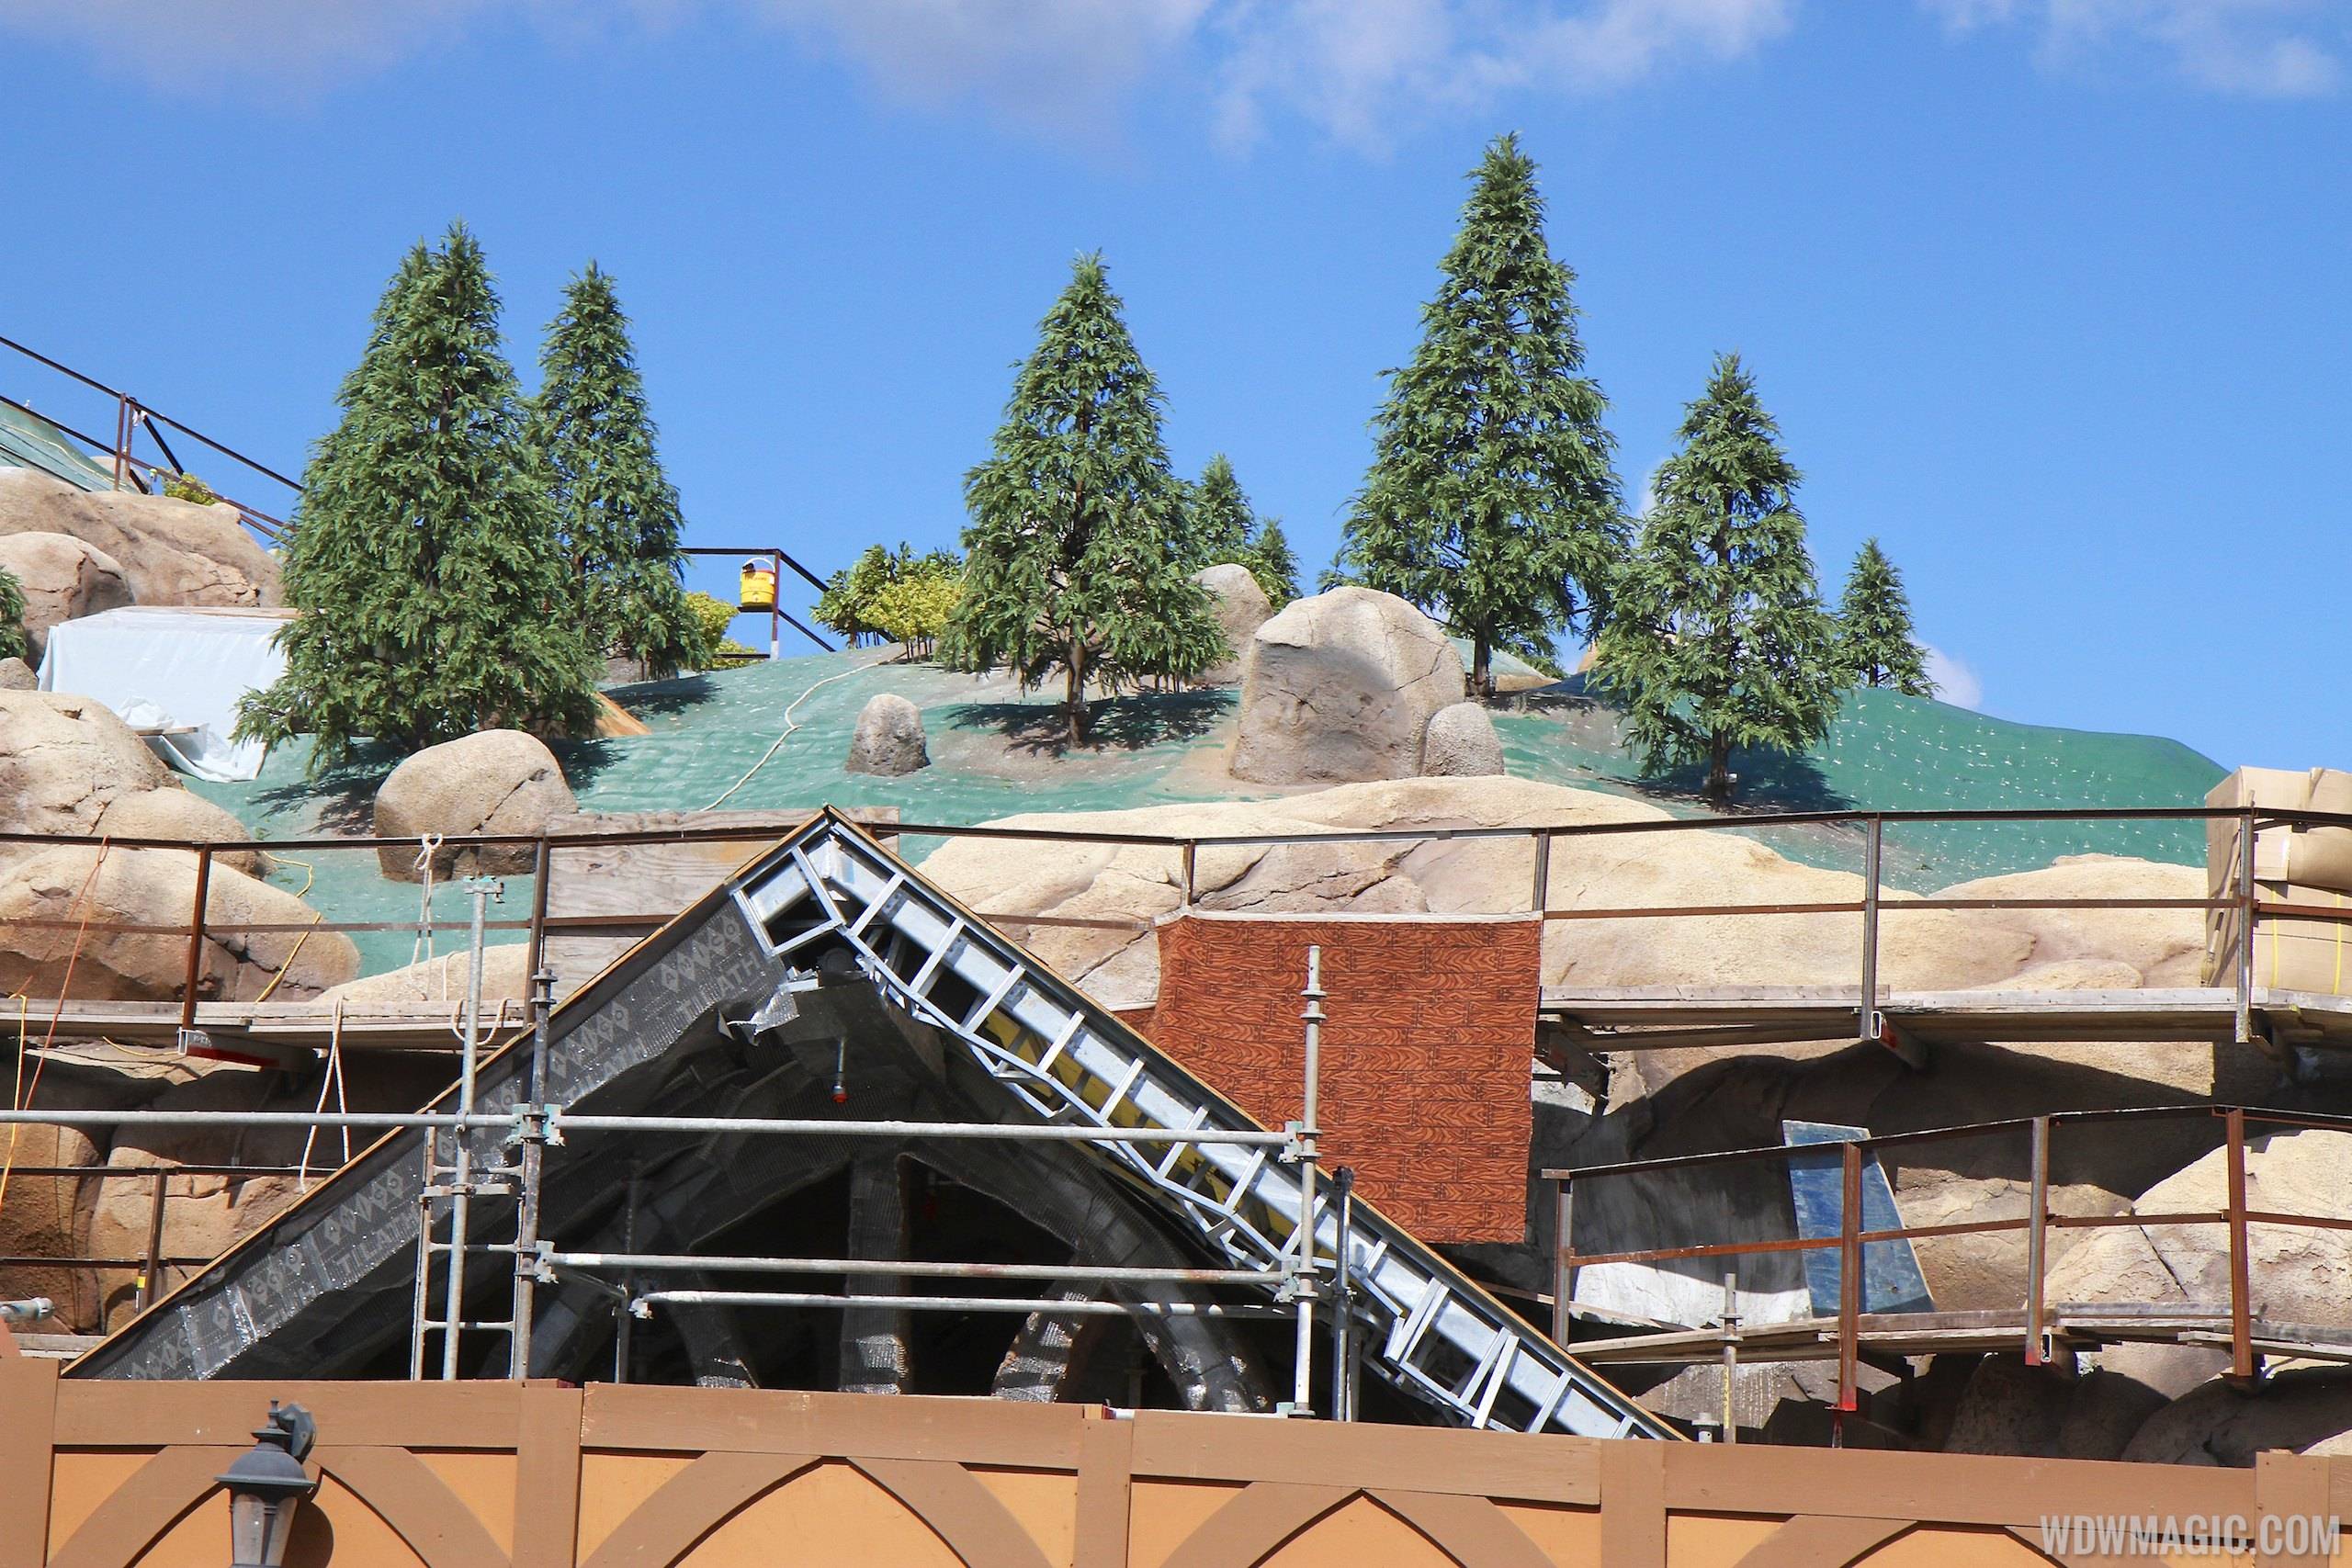 PHOTOS - Greenery and trees arrive at the Seven Dwarfs Mine Train